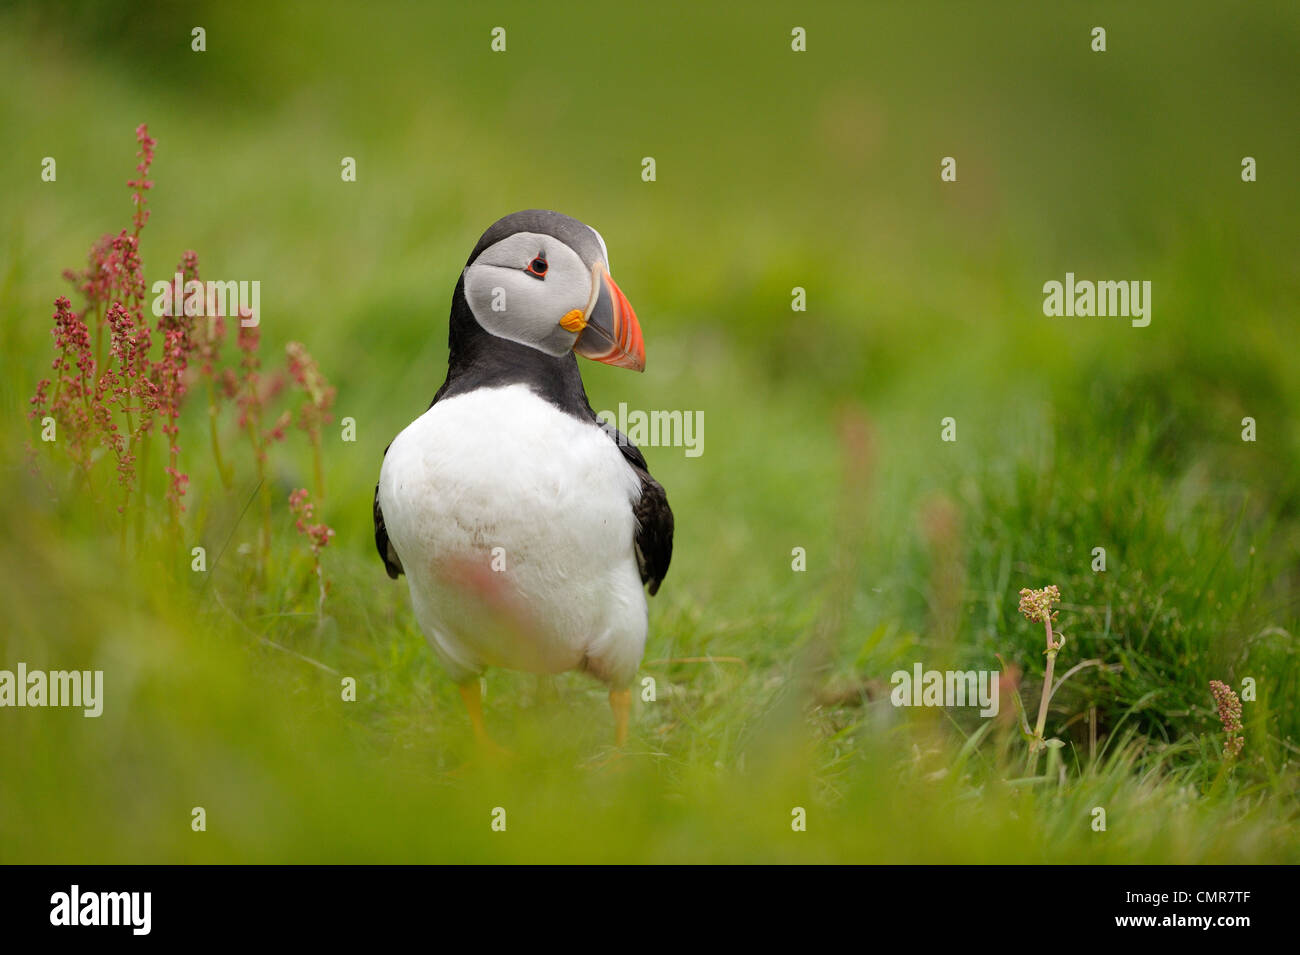 Puffin standing in grass. Stock Photo